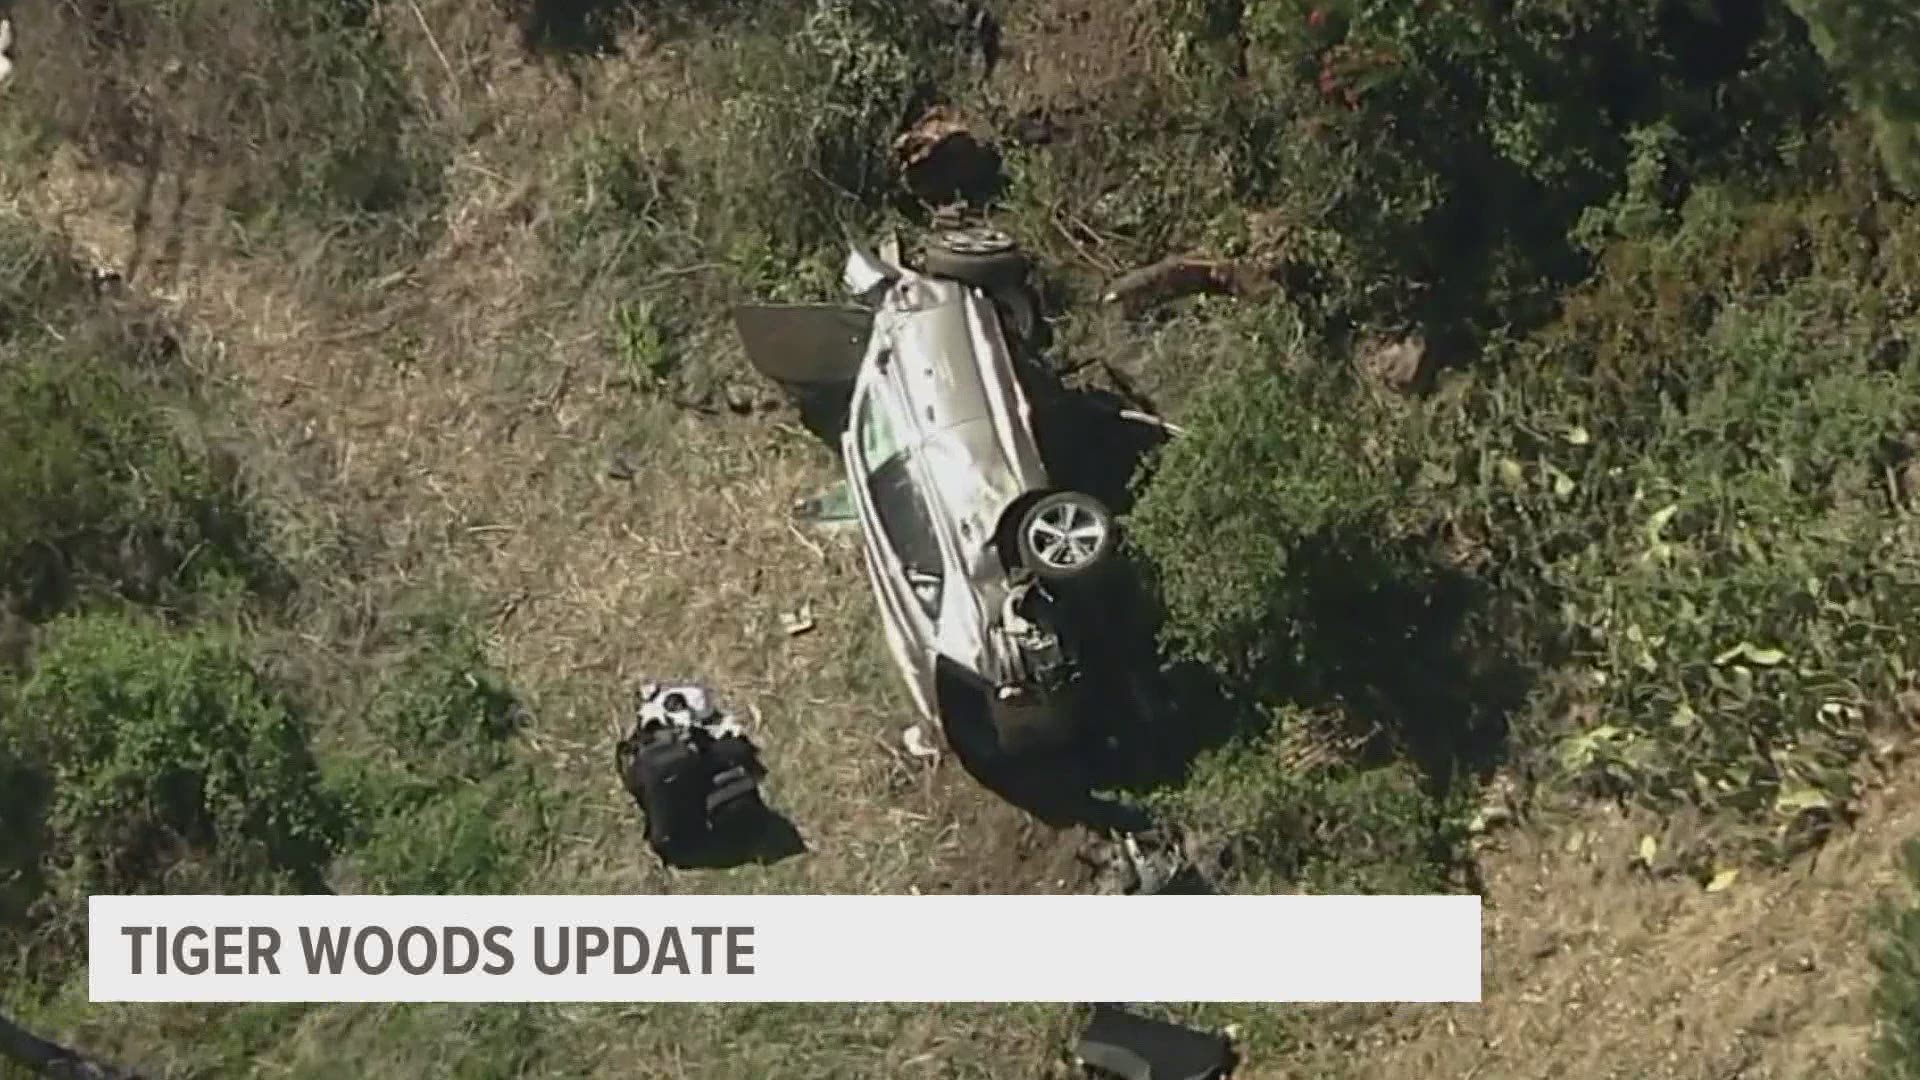 The first deputy who arrived at the scene of the rollover crash said "it’s very fortunate that Mr. Woods was able to come out of this alive."